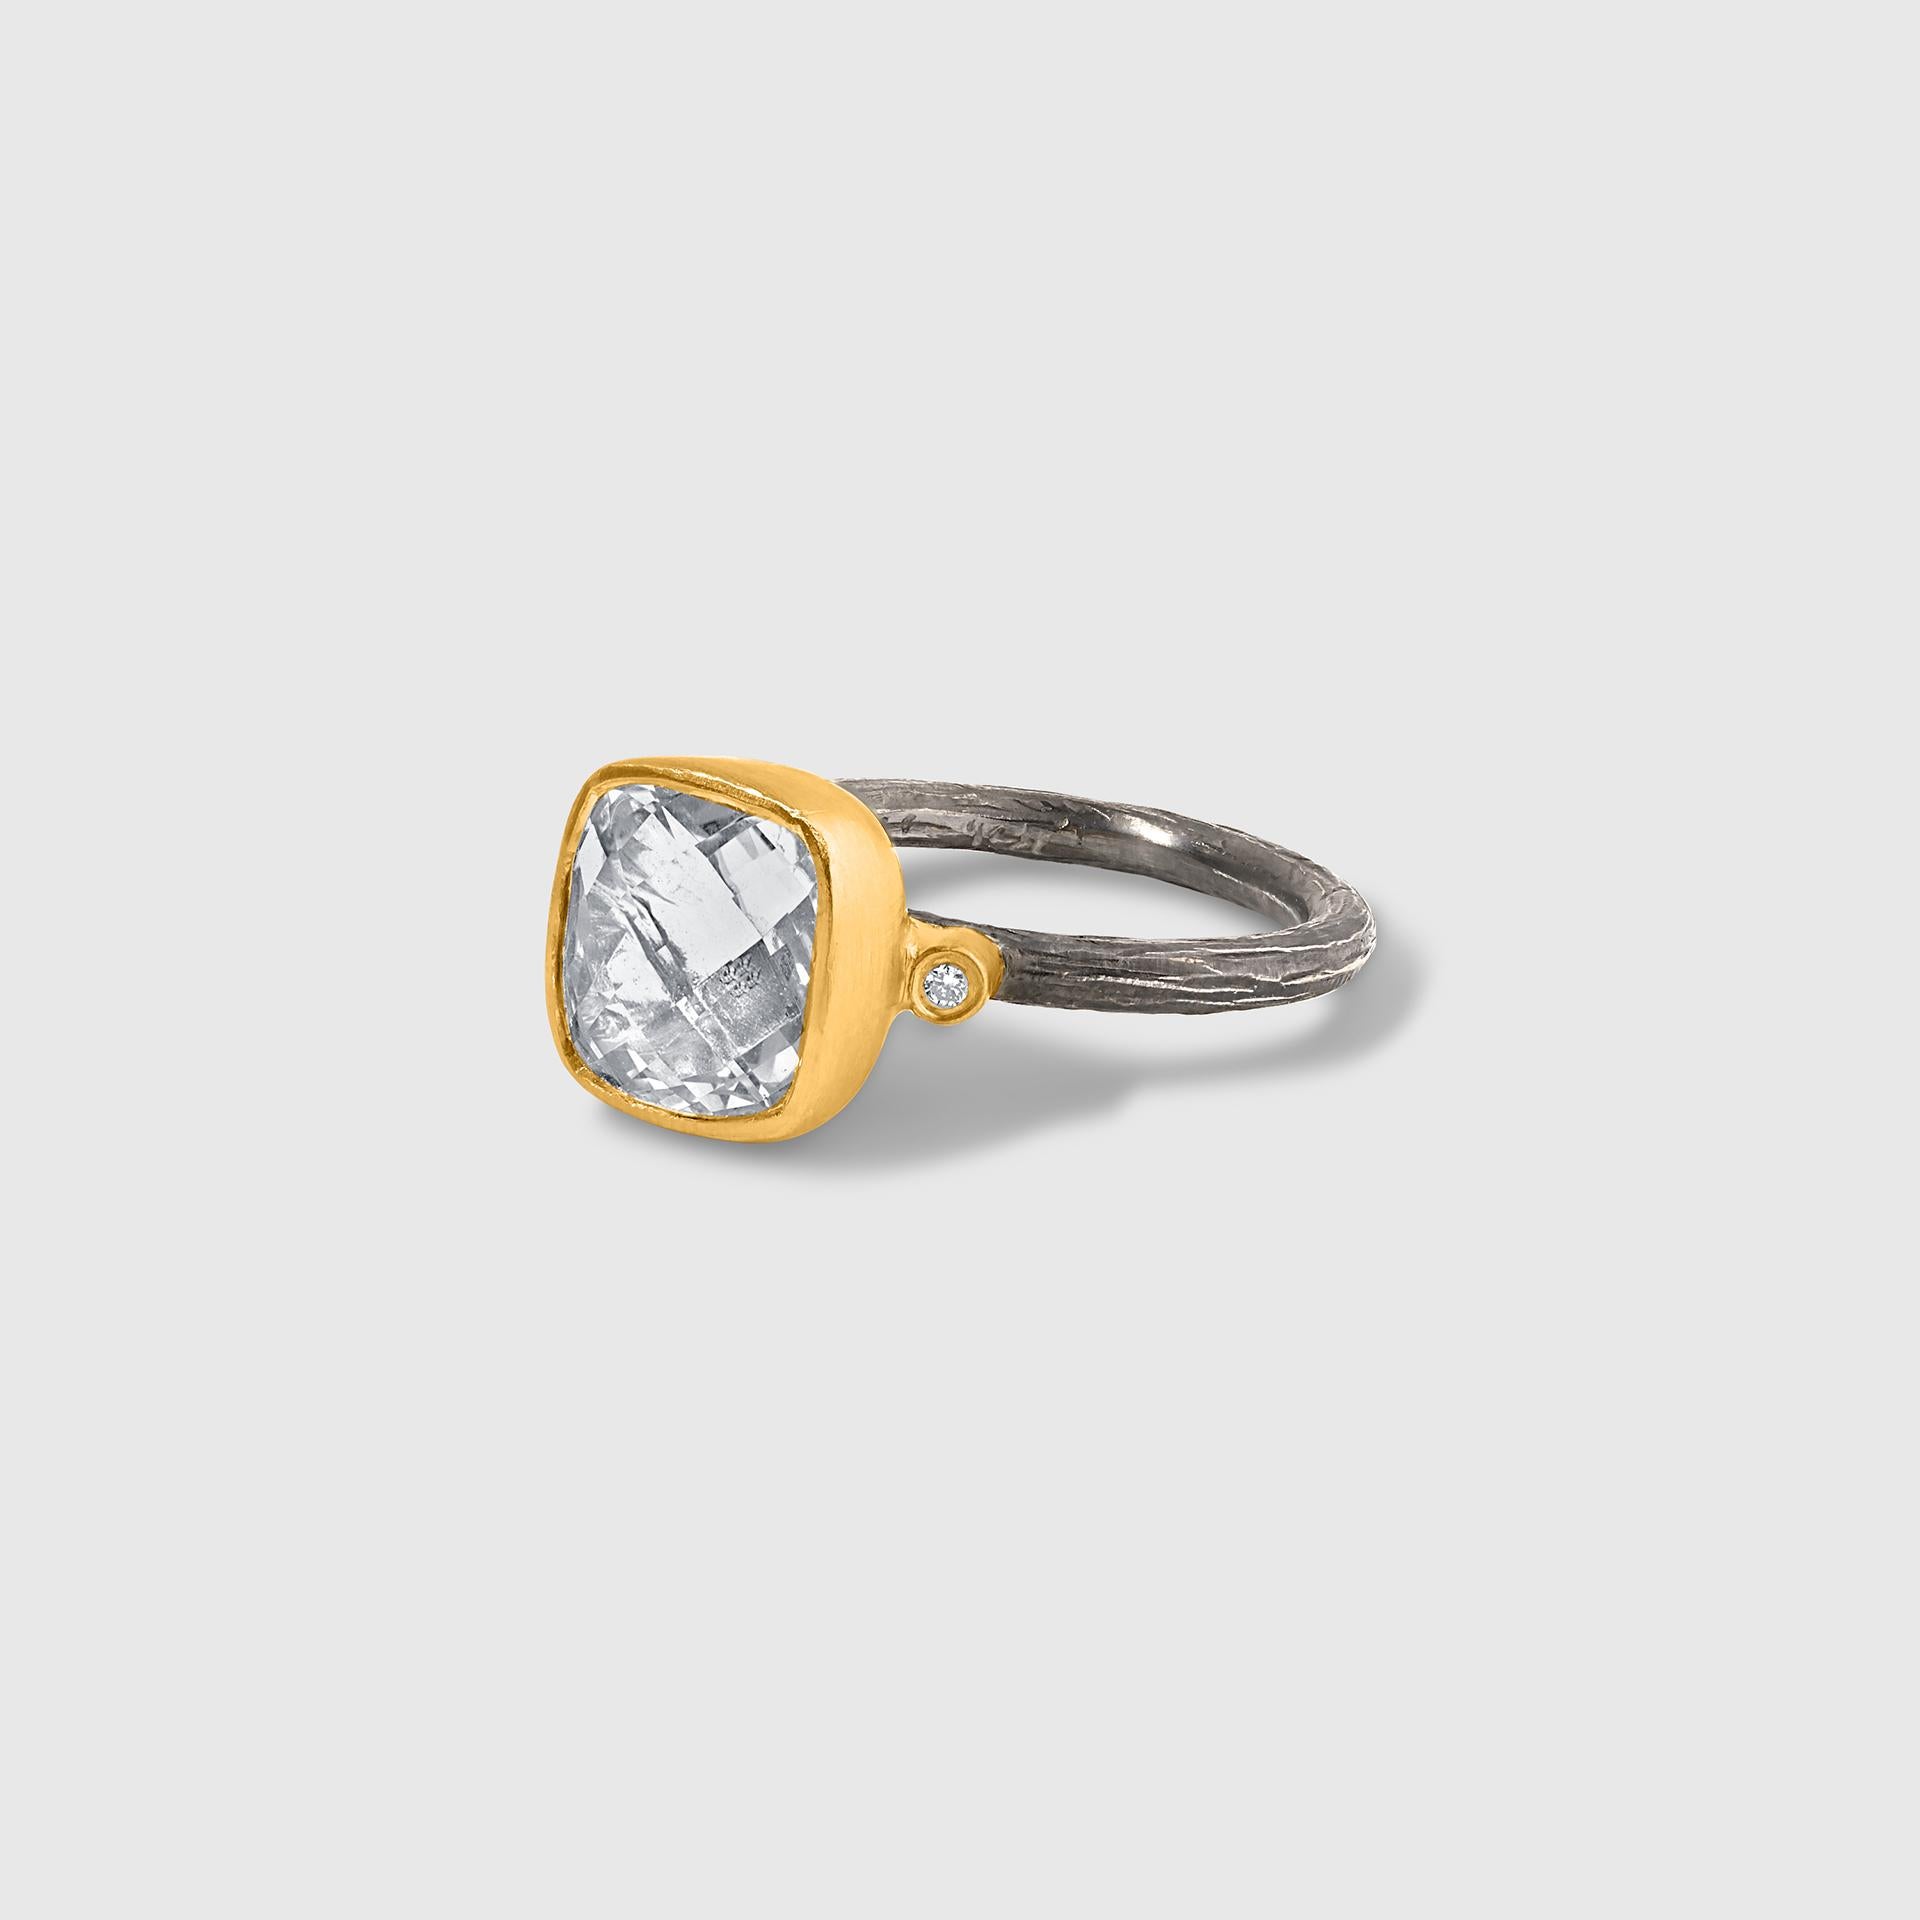 Byzantine 5.45ct Faceted Checkerboard Quartz and Diamond Ring, 24kt Yellow Gold and Silver For Sale